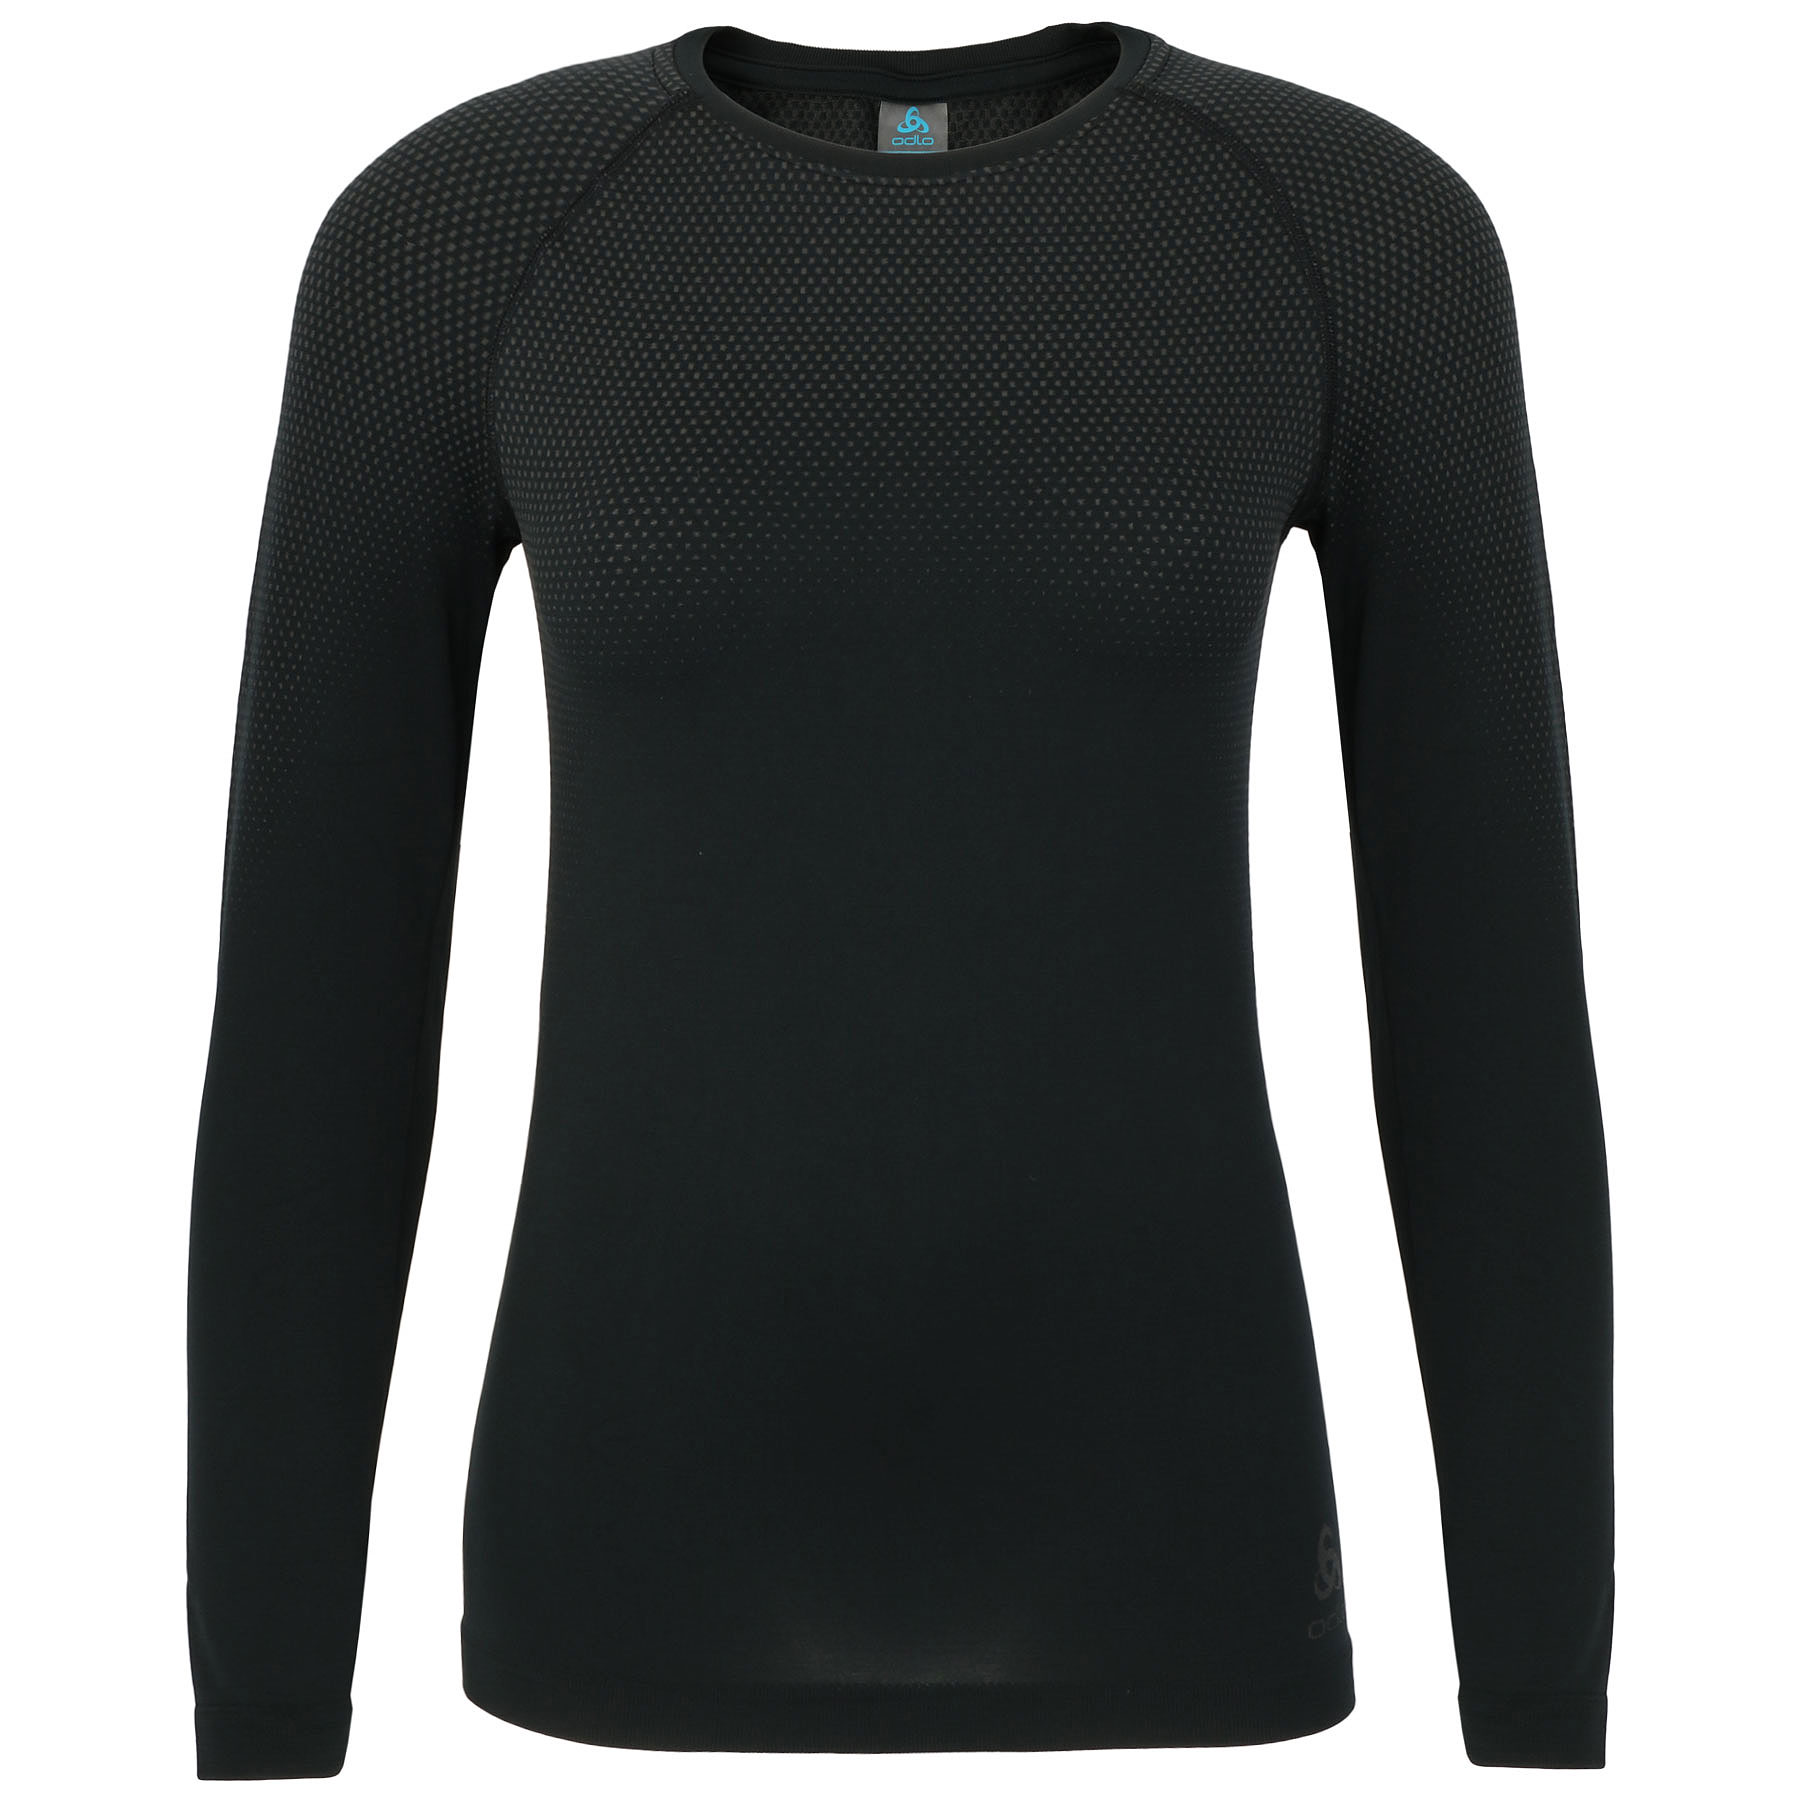 Picture of Odlo Performance Light Long-Sleeve Base Layer Top Women - black